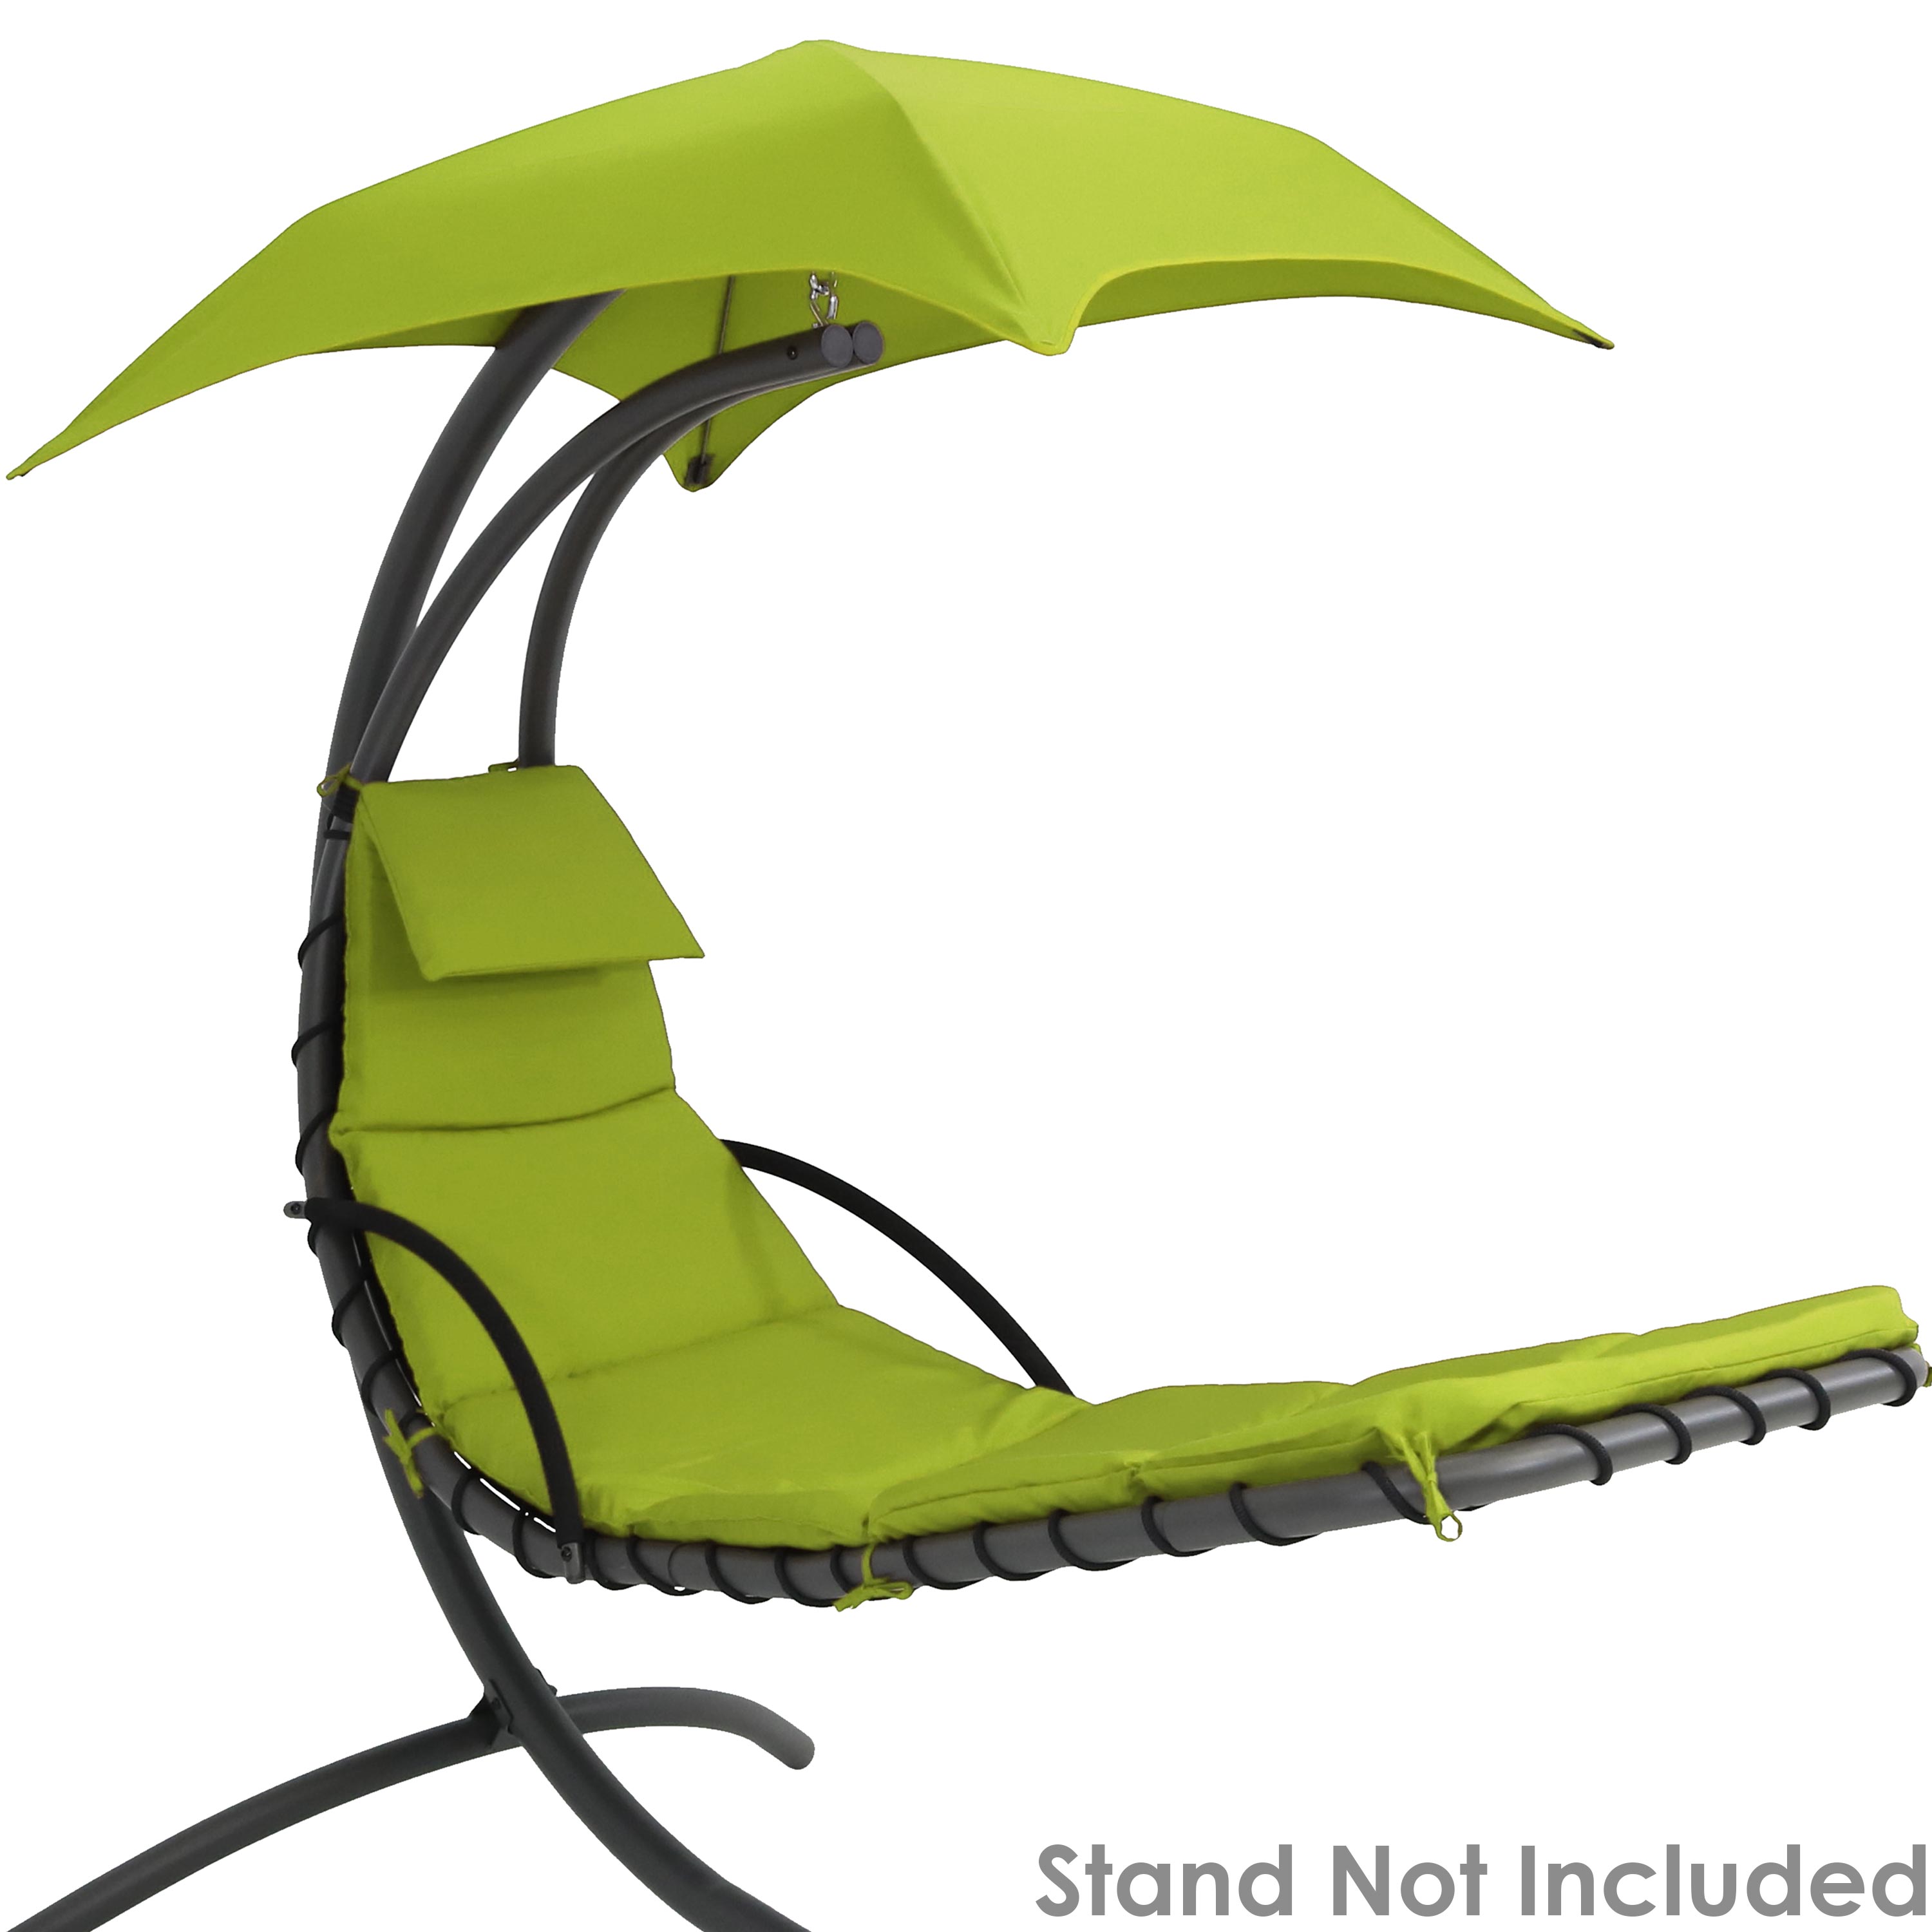 Outdoor Hanging Lounge Chair Replacement Cushion and Umbrella Fabric for Chaise Hanging Hammock Chair - image 3 of 3